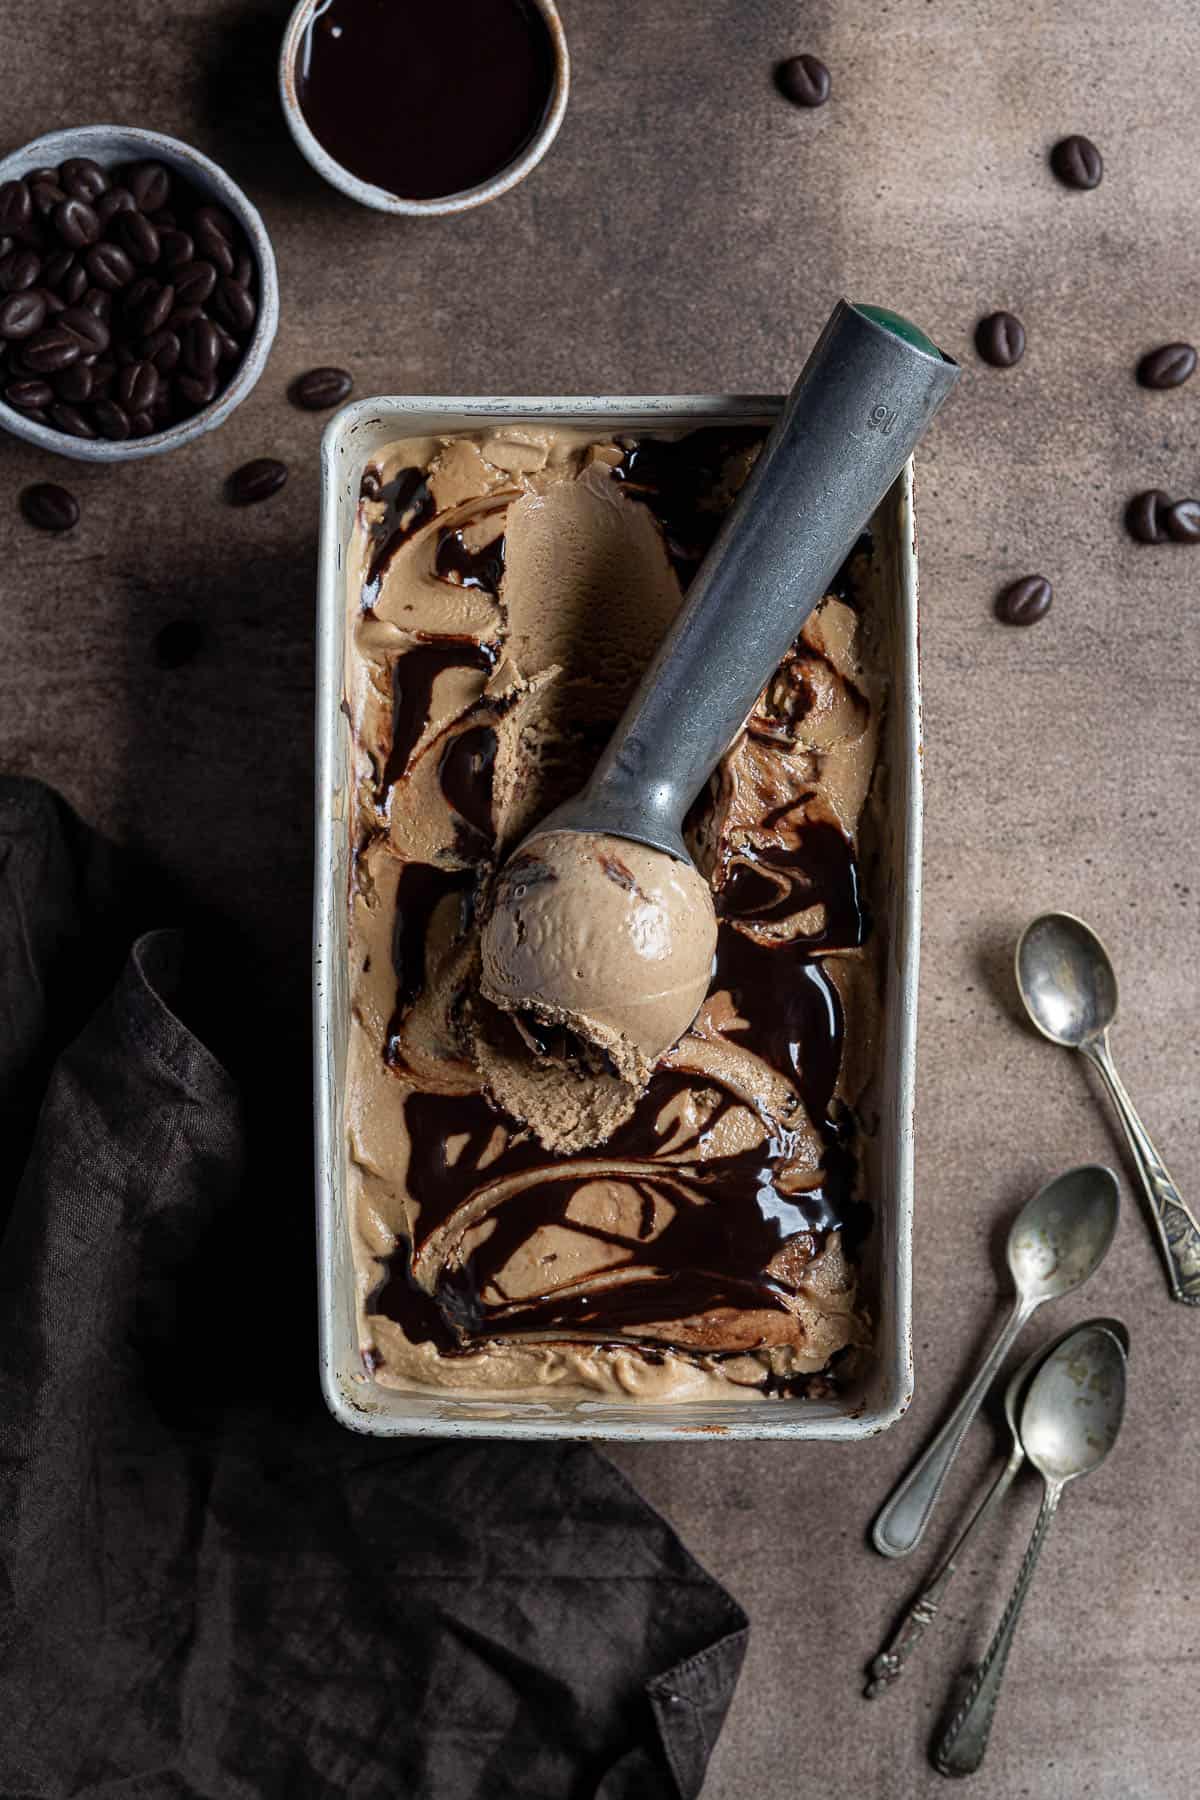 Vegan coffee ice cream in a metal tin on a brown surface with a bowl of chocolate sauce, bowl of chocolate coffee beans, a brown cloth and metal tea spoons.